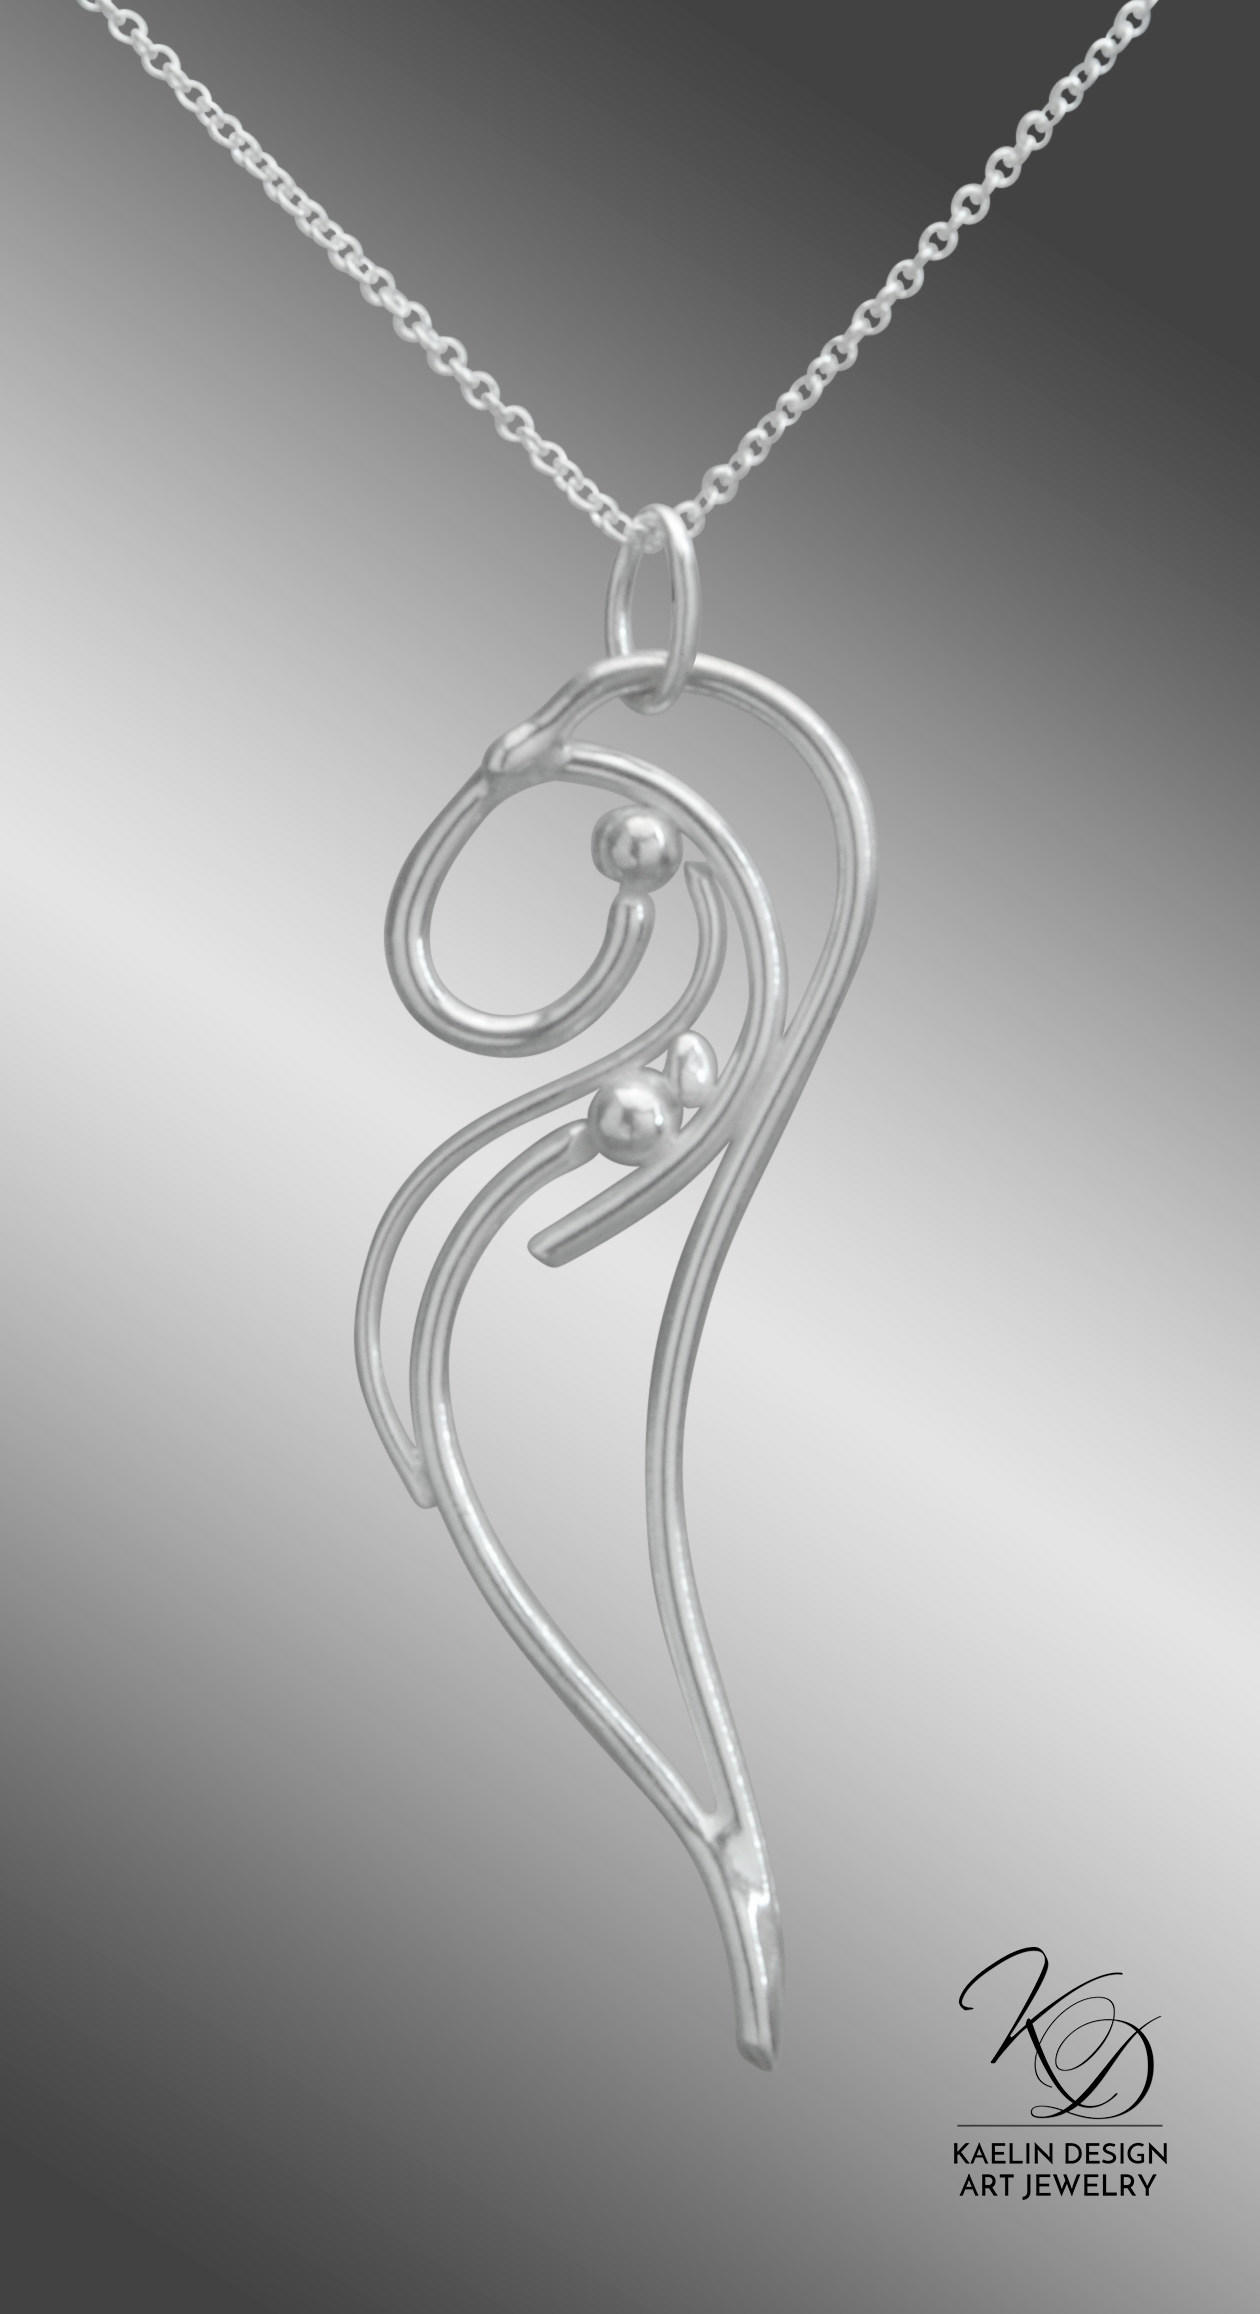 Eddy Sterling Silver Hand Forged Art Jewelry Pendant by Kaelin Design